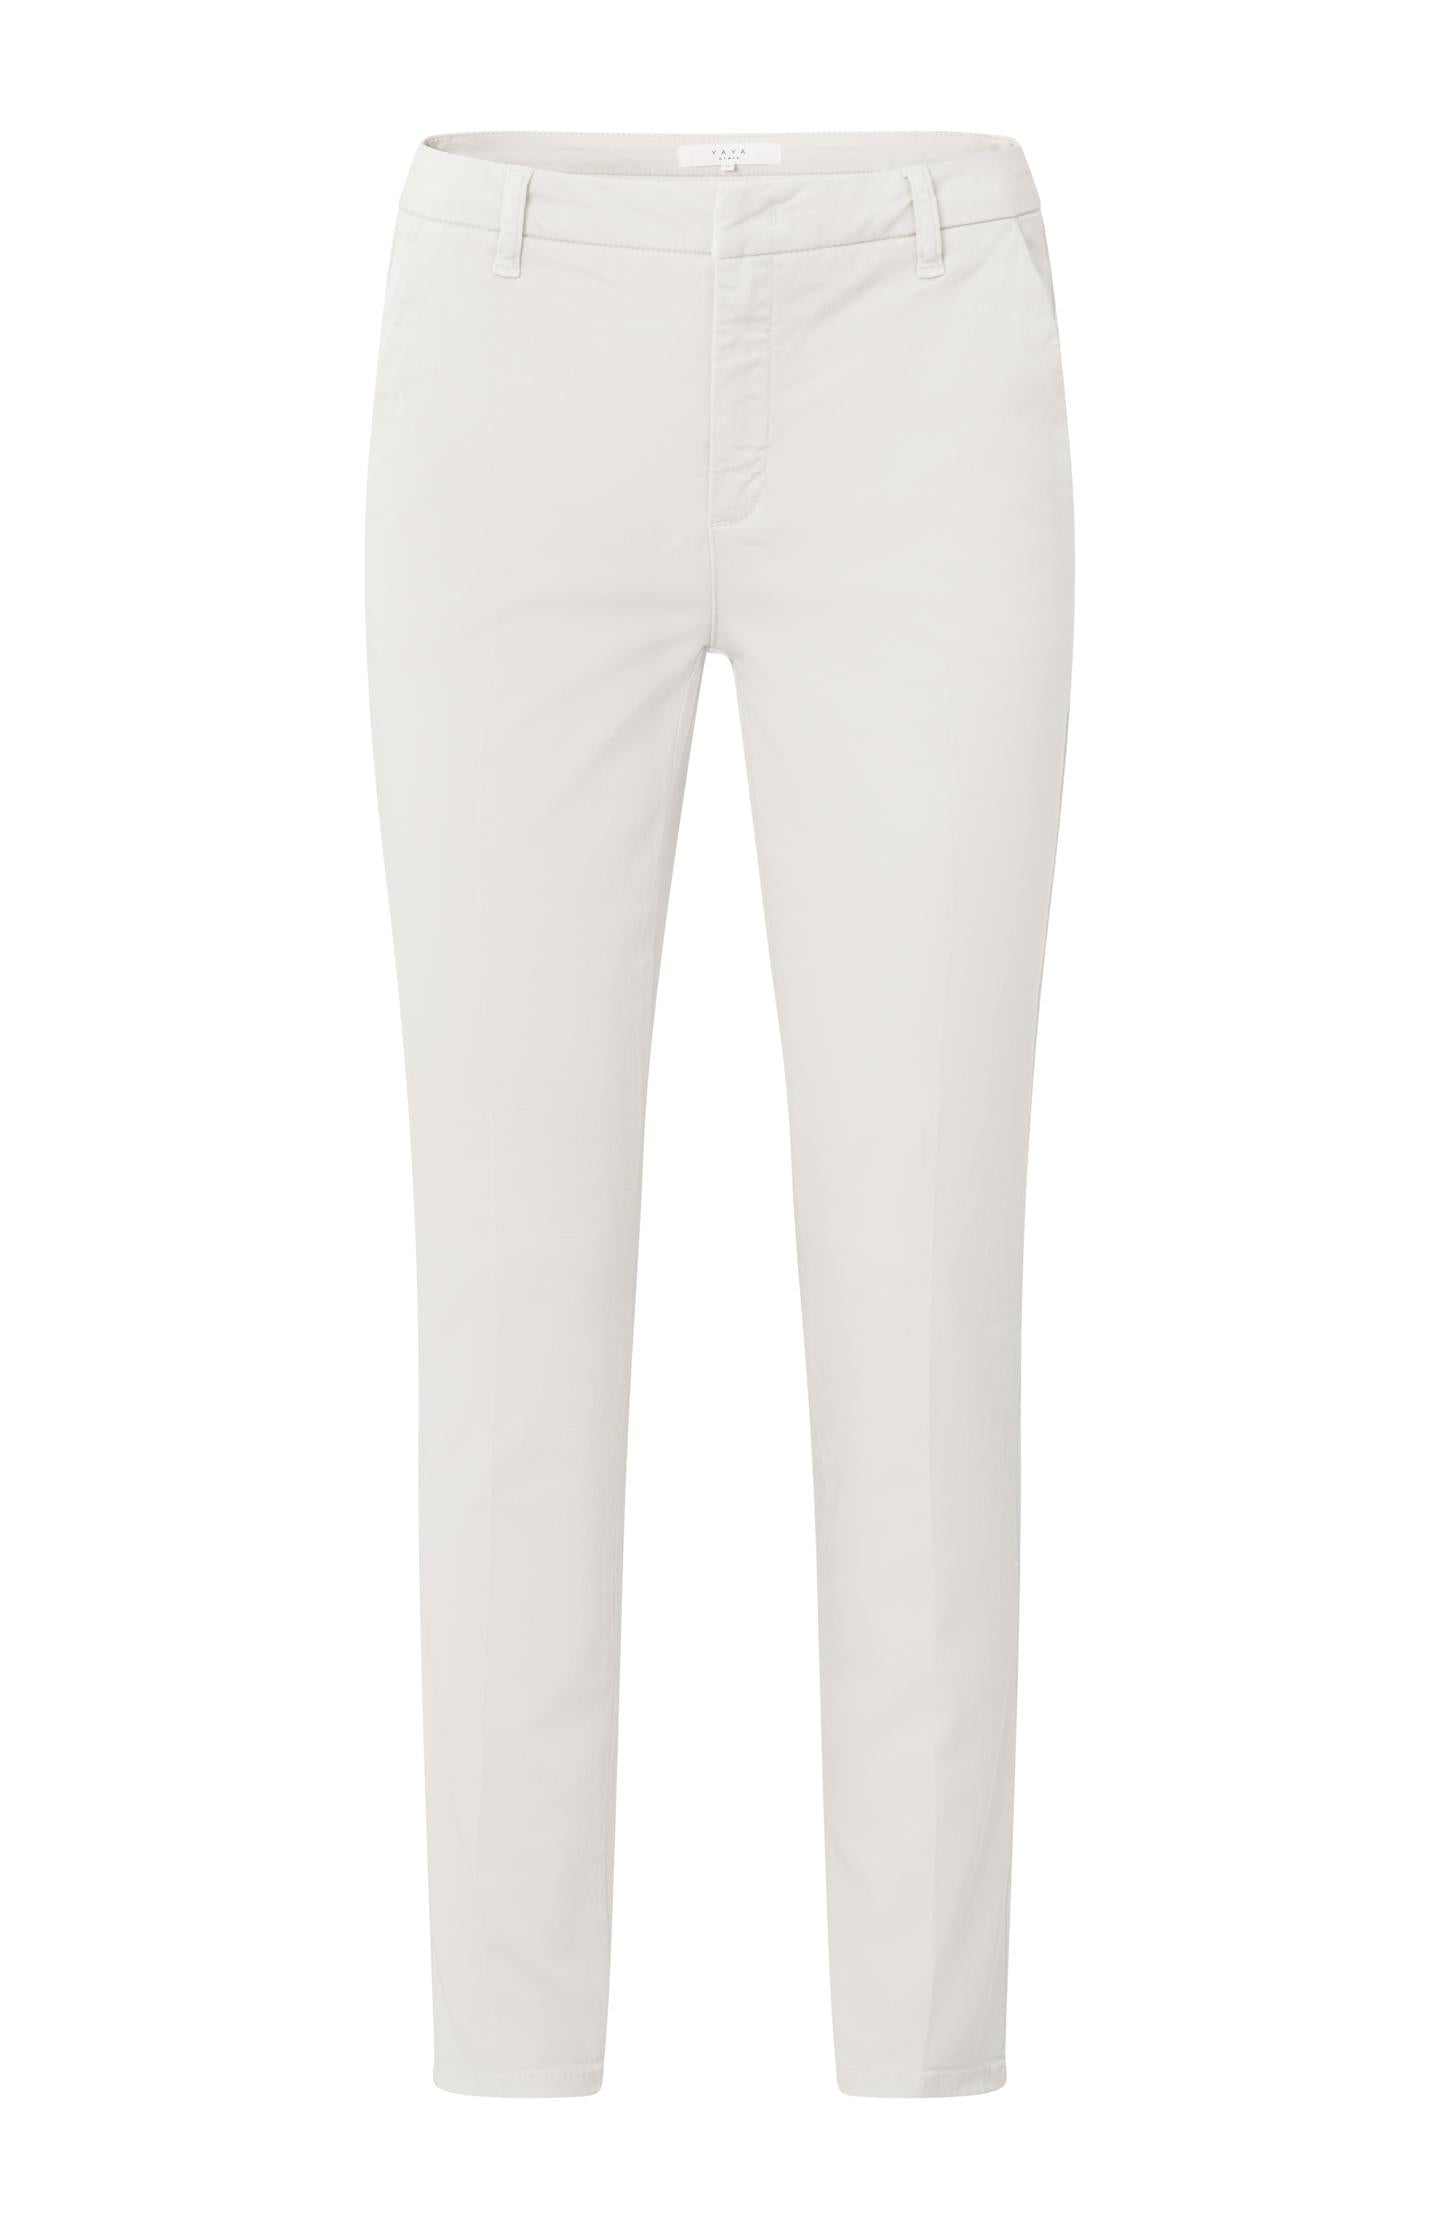 Basic chino with straight leg, side pockets and zip fly - Type: product